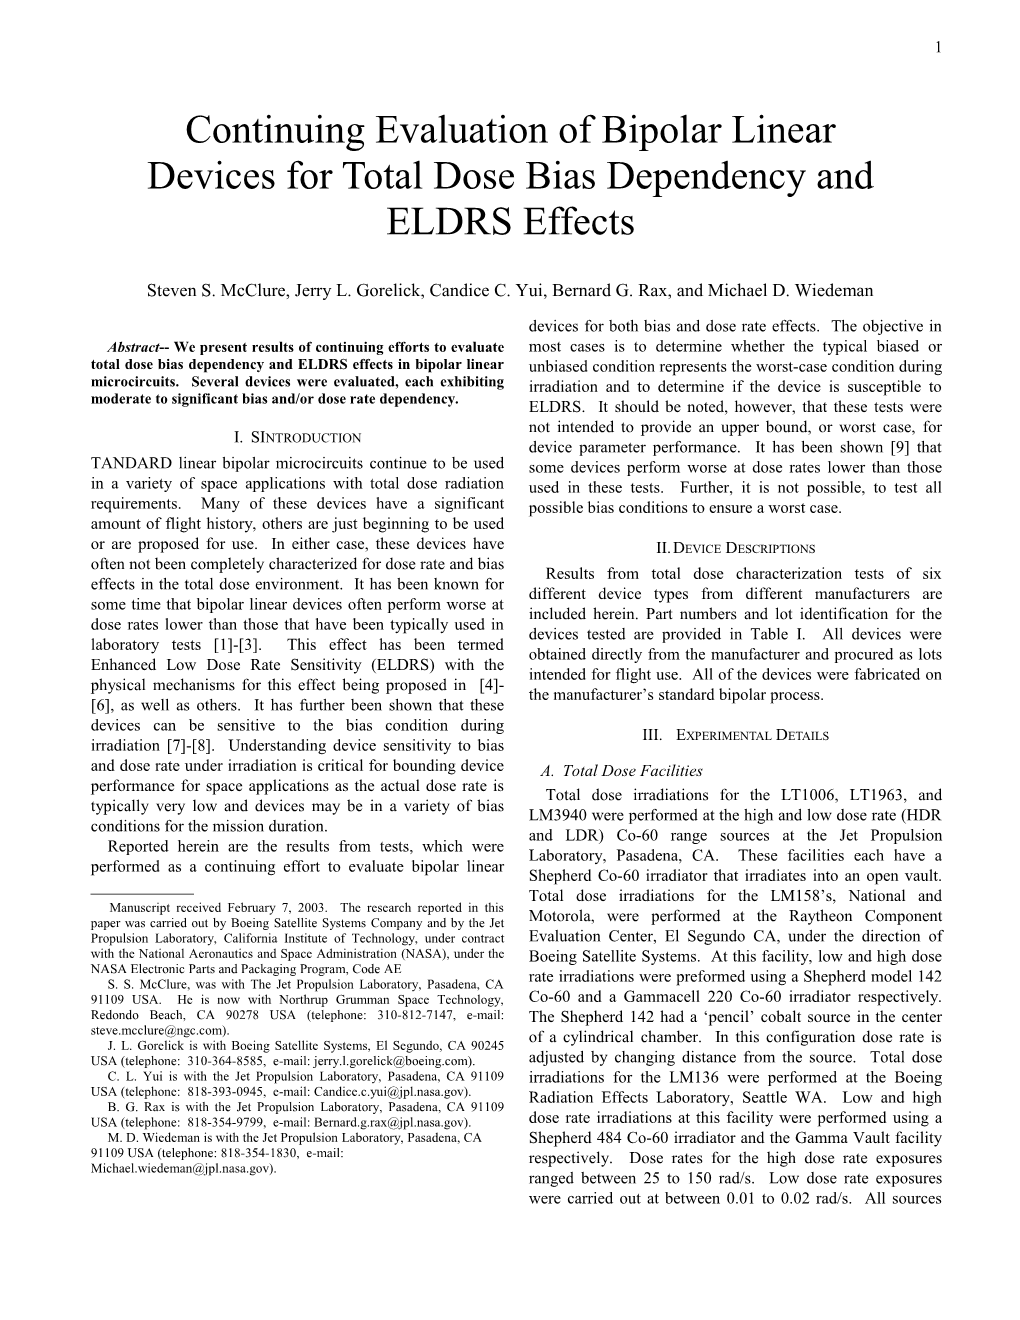 Continuing Evaluation of Bipolar Linear Devices for Total Dose Bias Dependency and ELDRS Effects